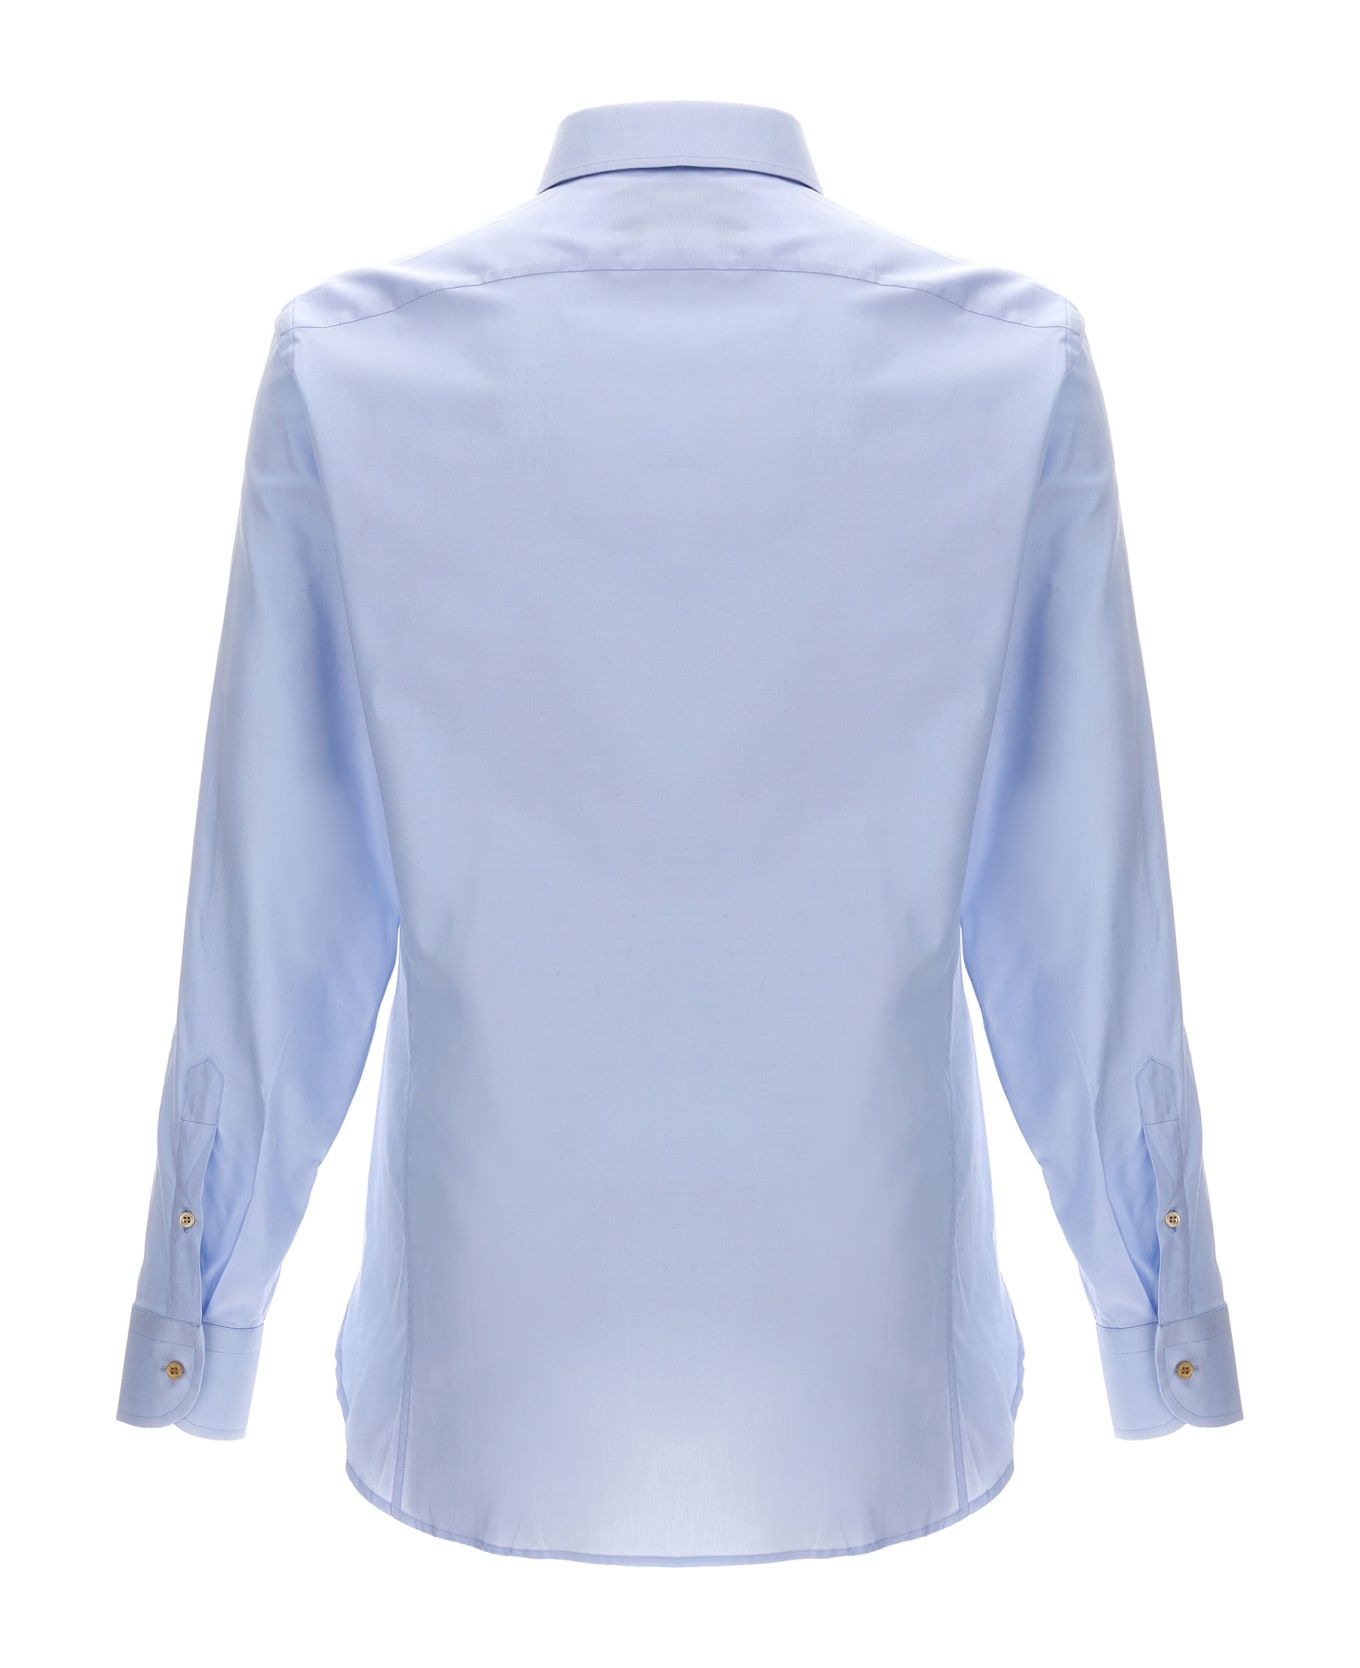 Gucci Double G Embroidery Shirt - Light Blue